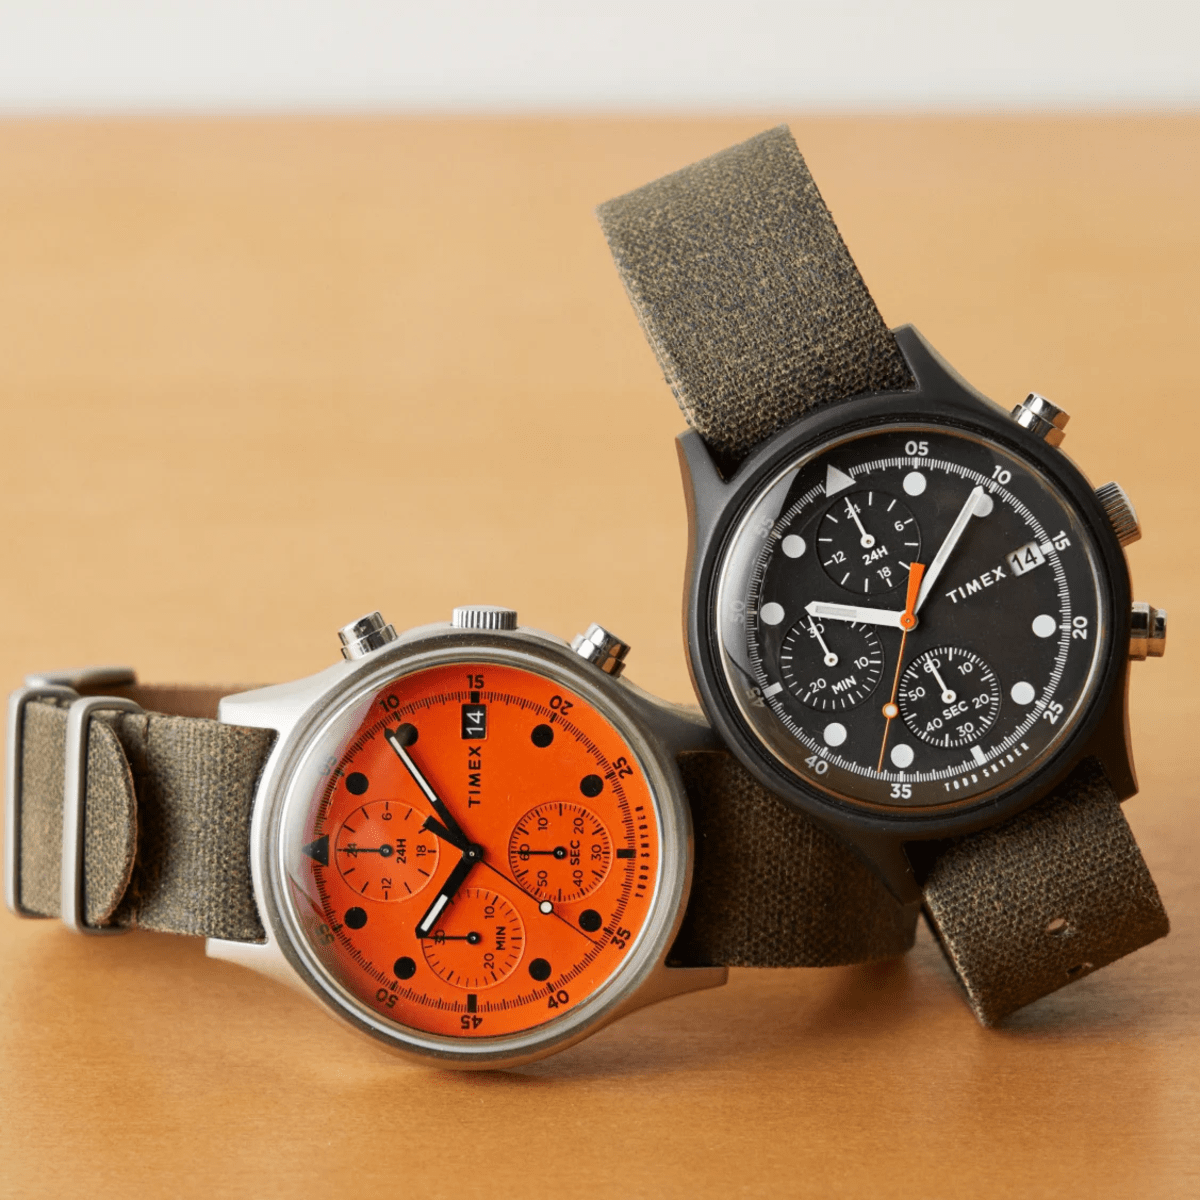 Todd Snyder and Timex Bring the Cool With New MK1 Sky King - Airows